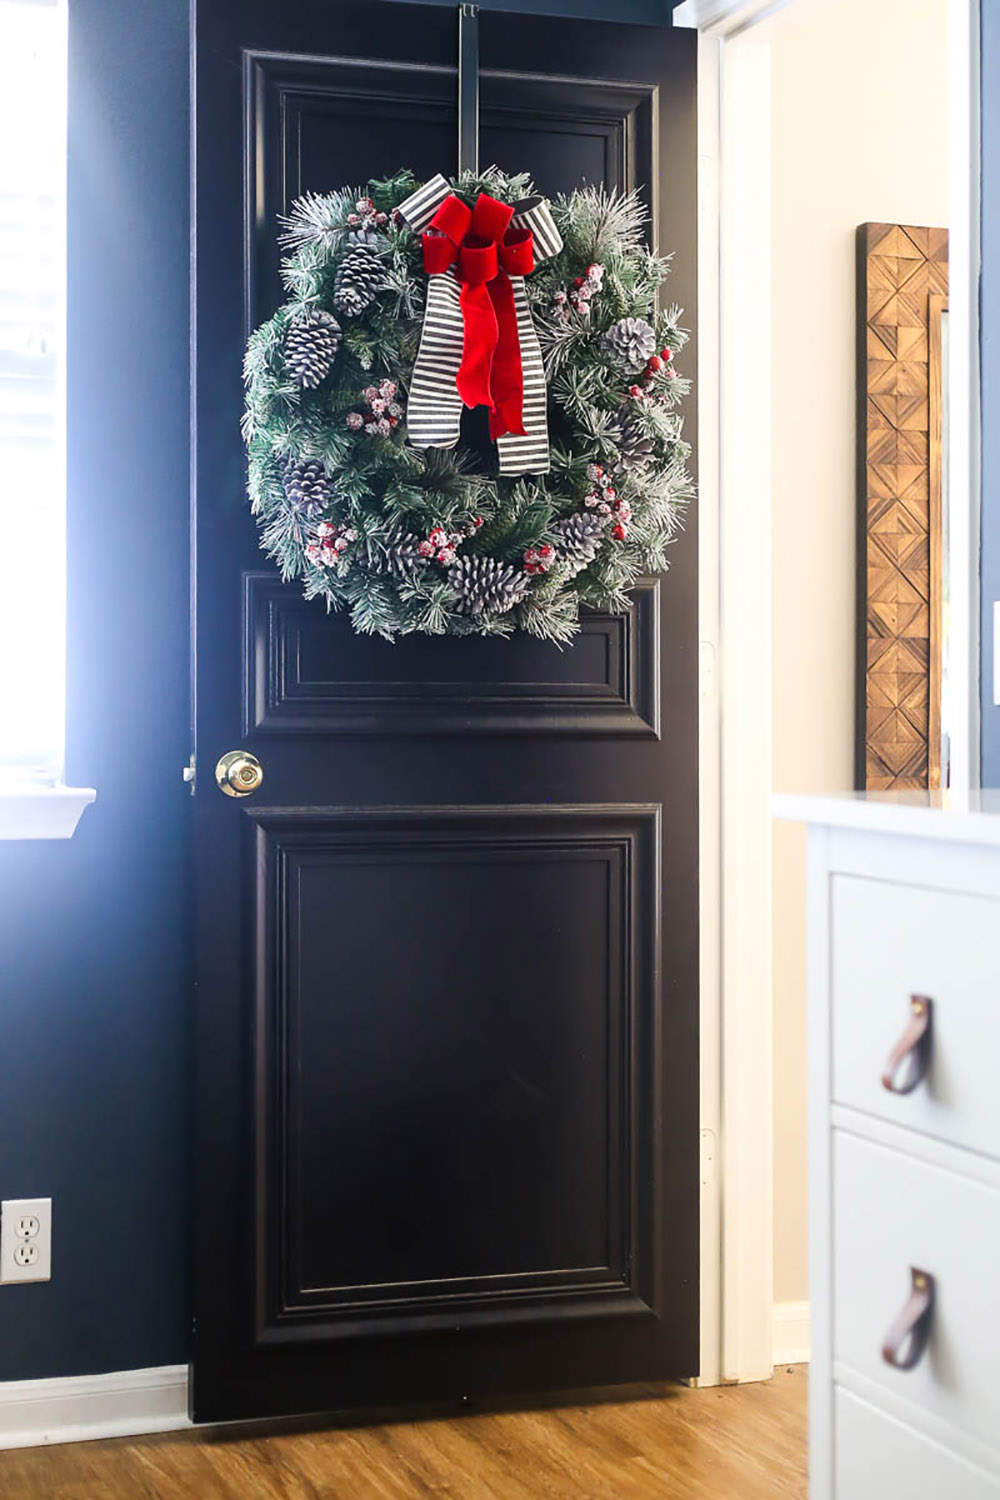 A large wreath with pinecones, berries, and bows hangs on a black bedroom door.